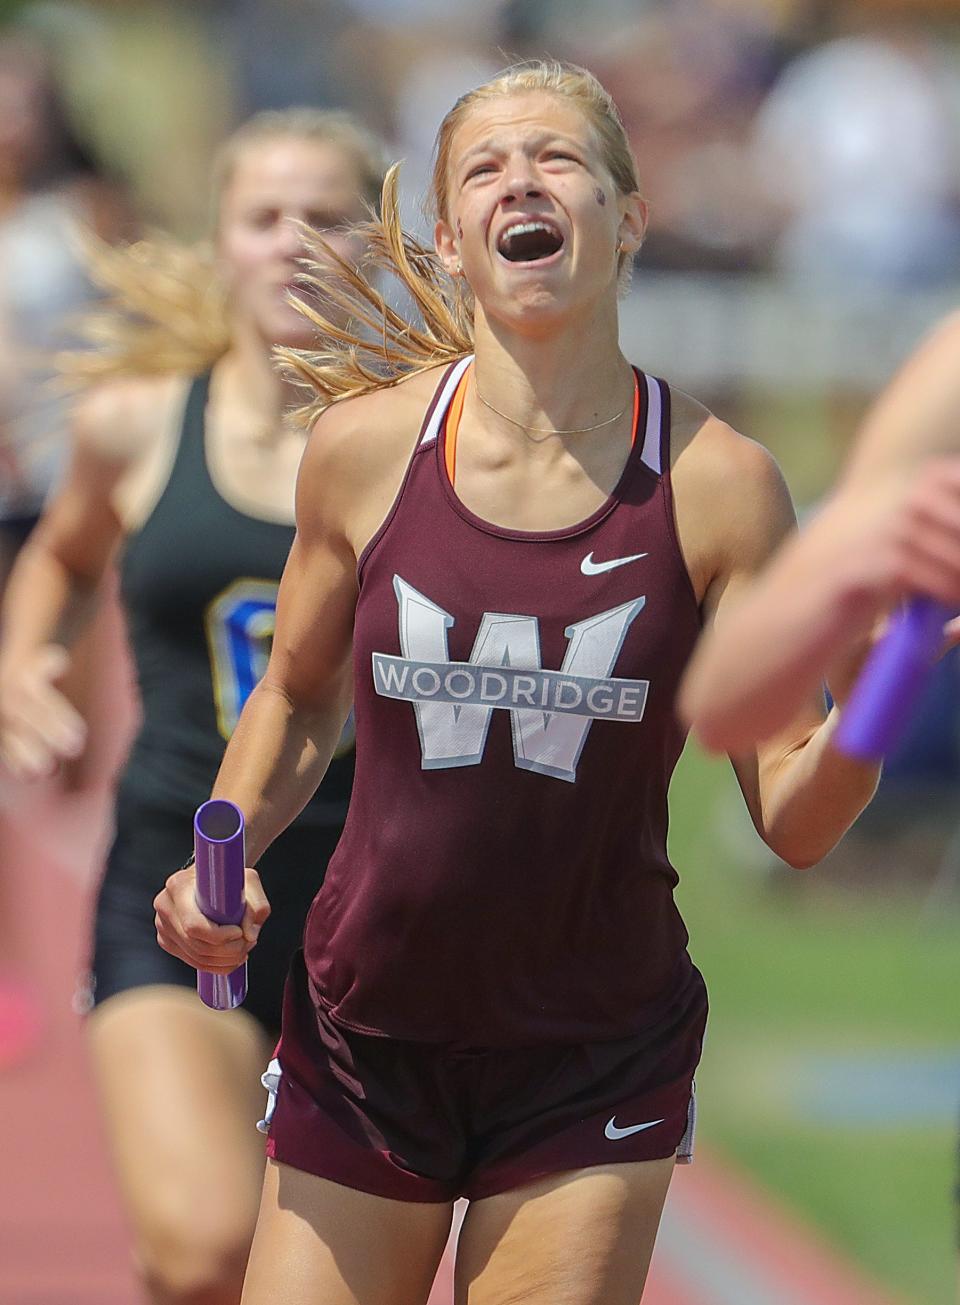 Woodridge's Reese Reaman reacts after clinching team state title in the 1,600-meter relay at 2023 state meet.